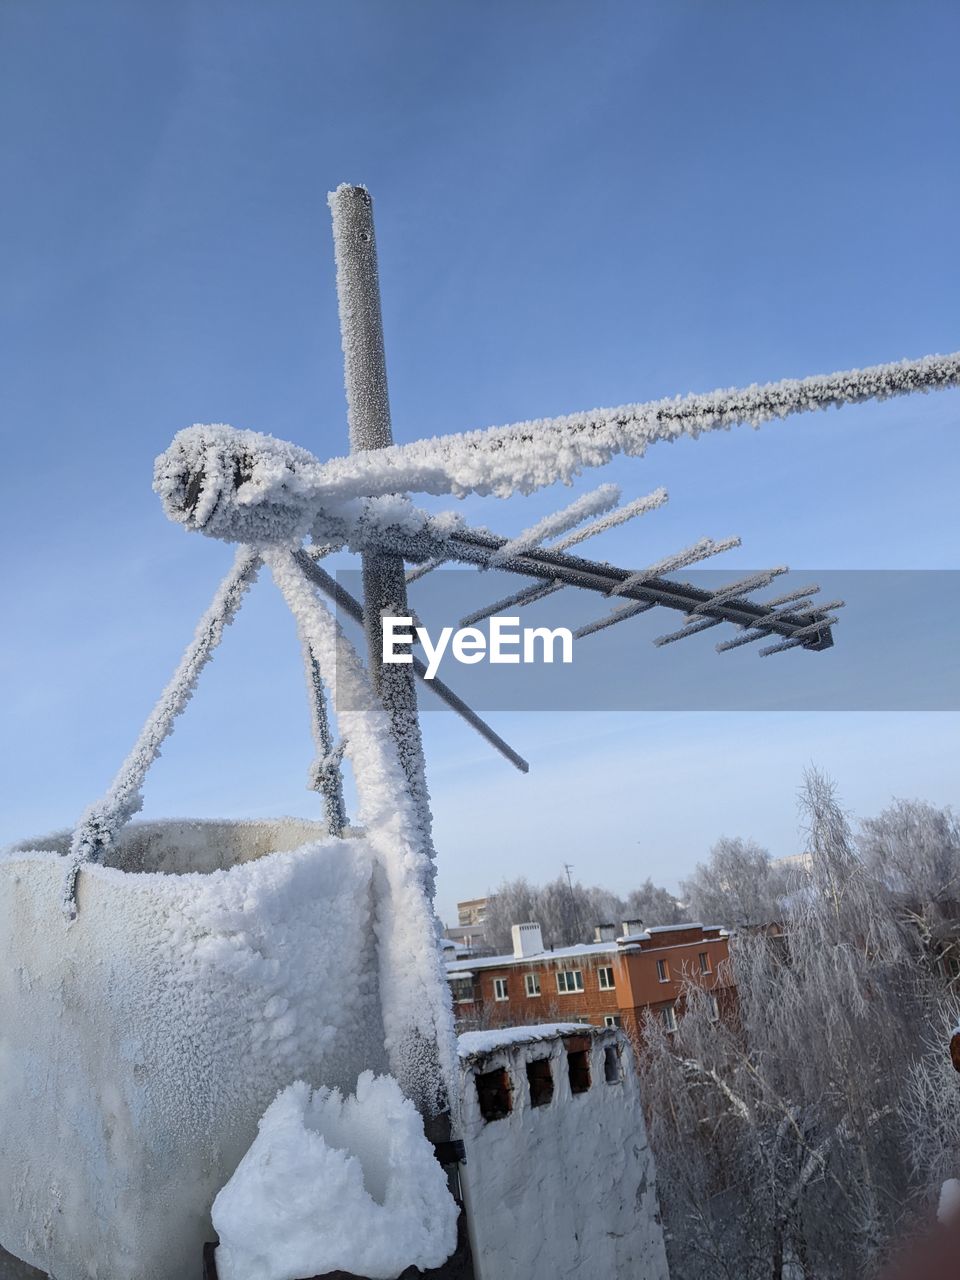 winter, snow, cold temperature, wind, nature, sky, architecture, windmill, no people, mill, environment, frozen, freezing, day, blue, ice, built structure, outdoors, white, clear sky, renewable energy, tree